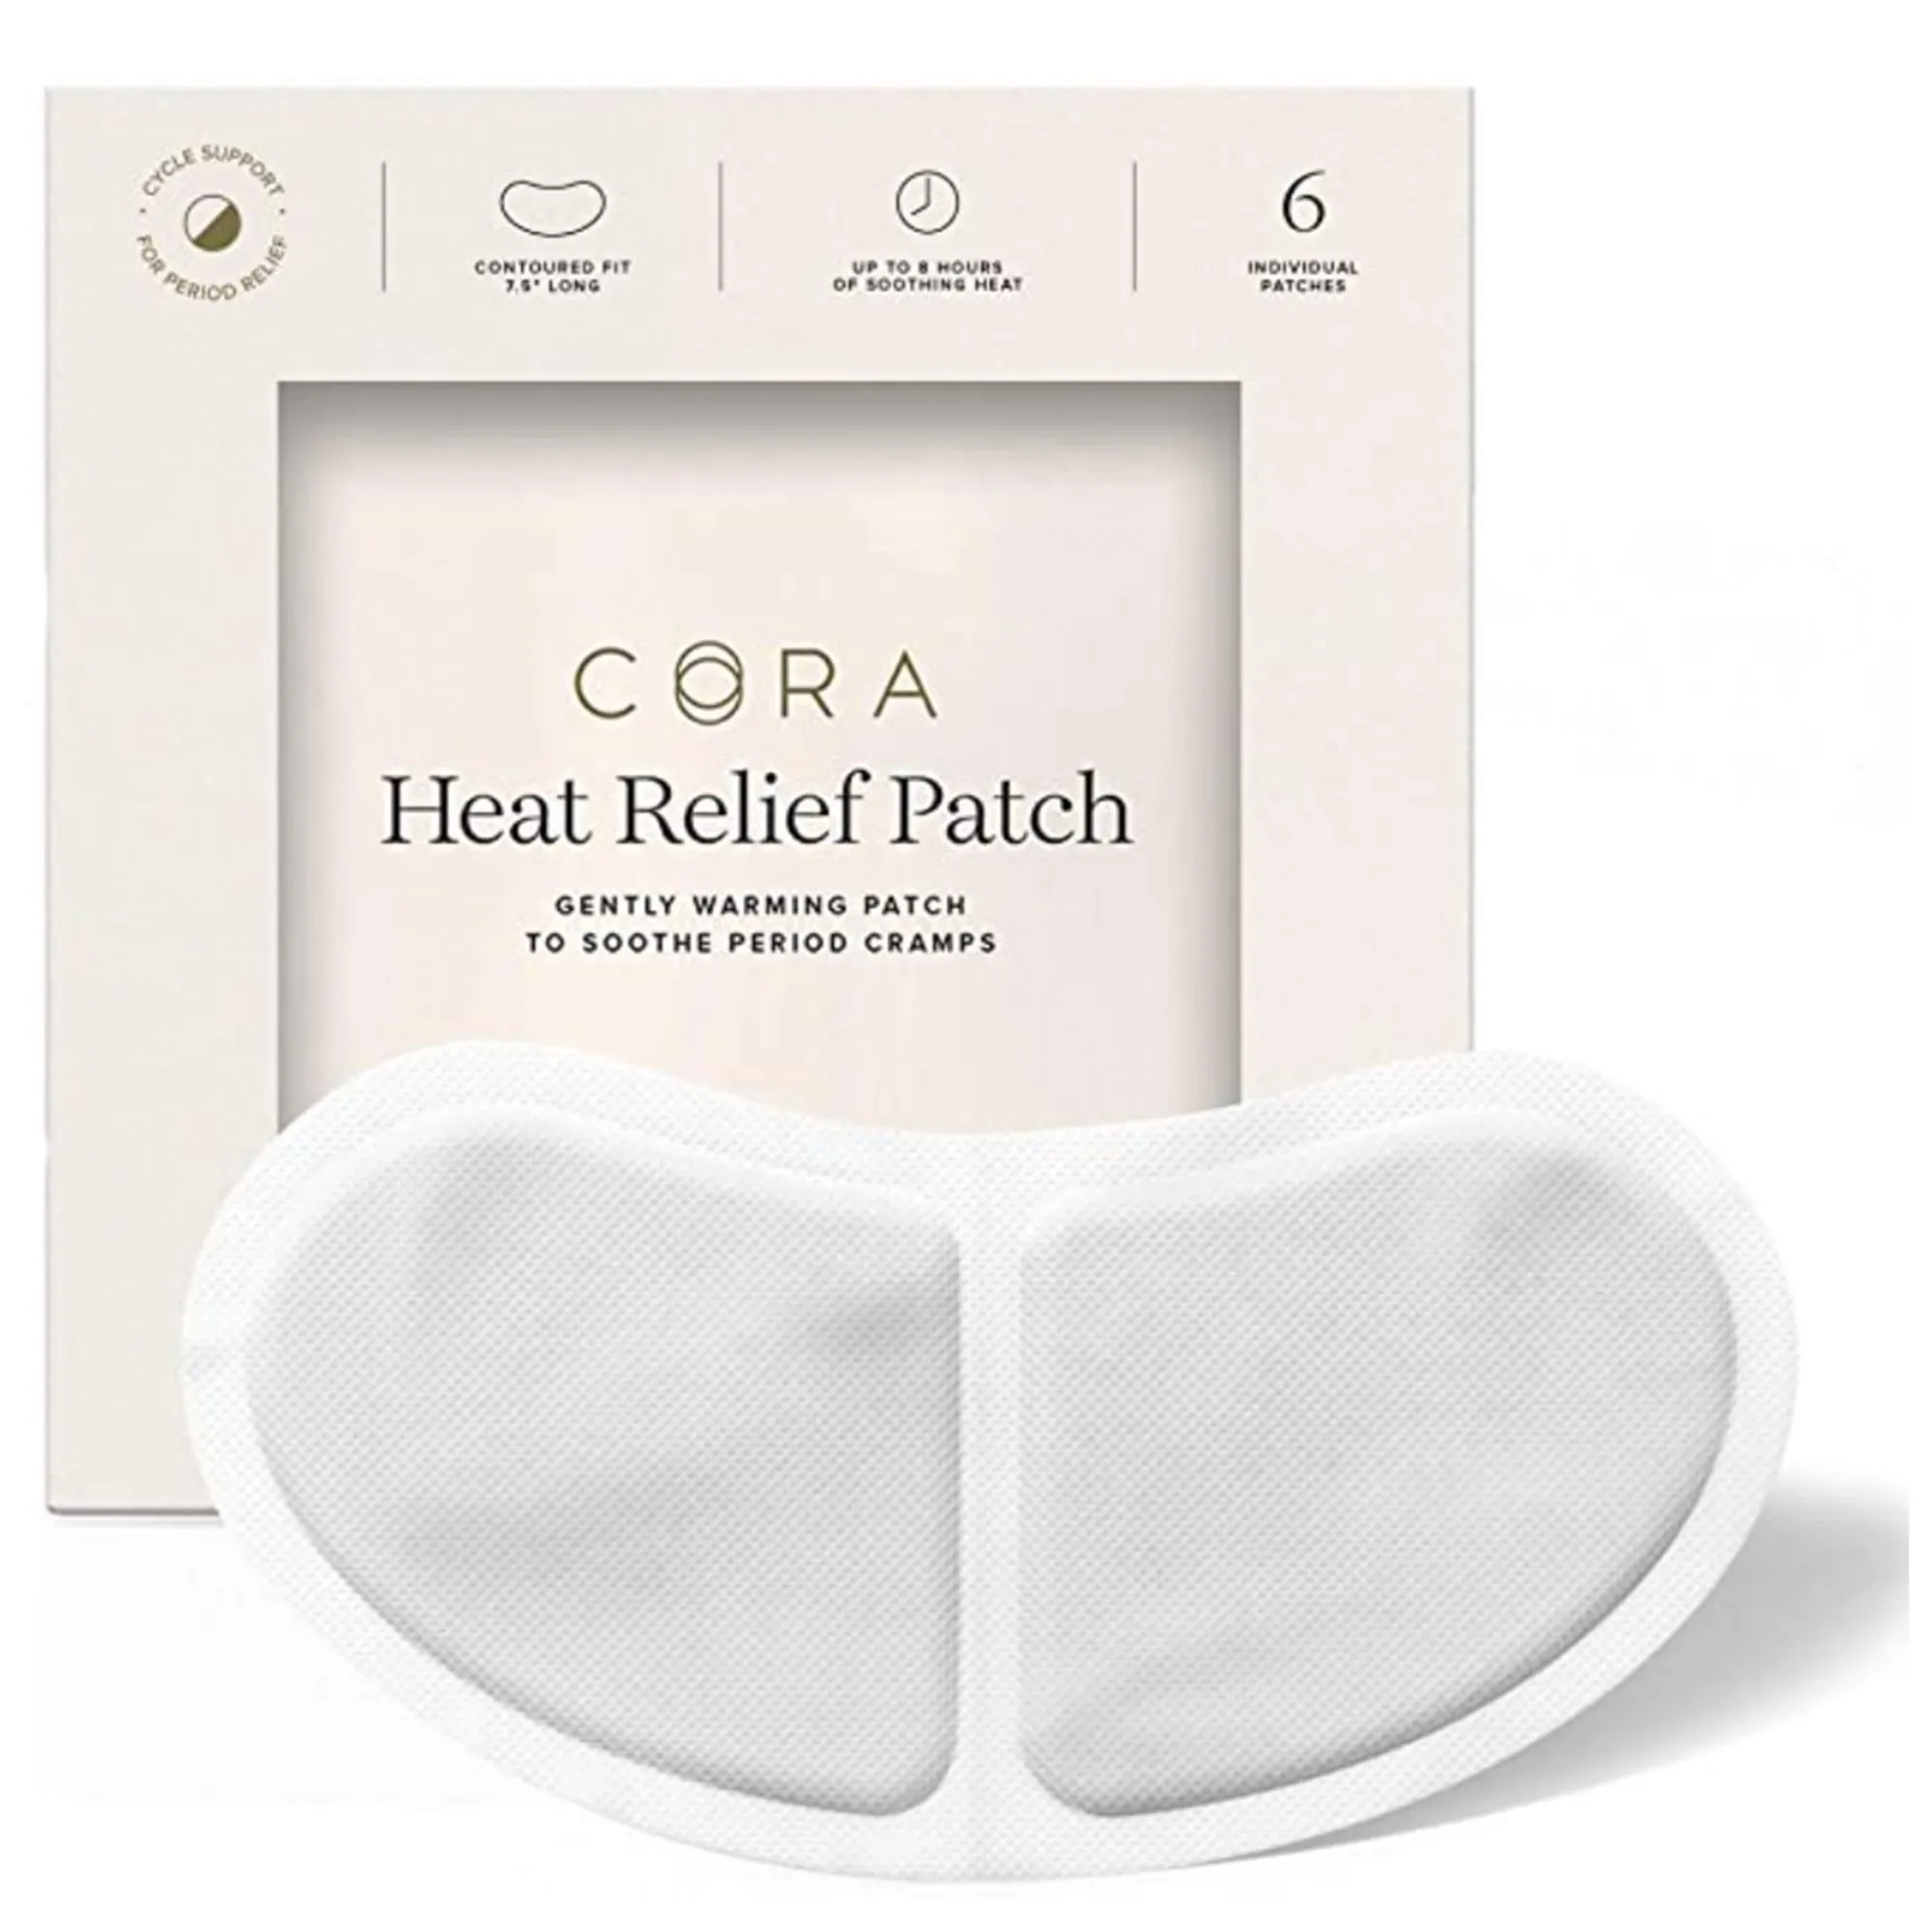 cora-heat-relief-patch